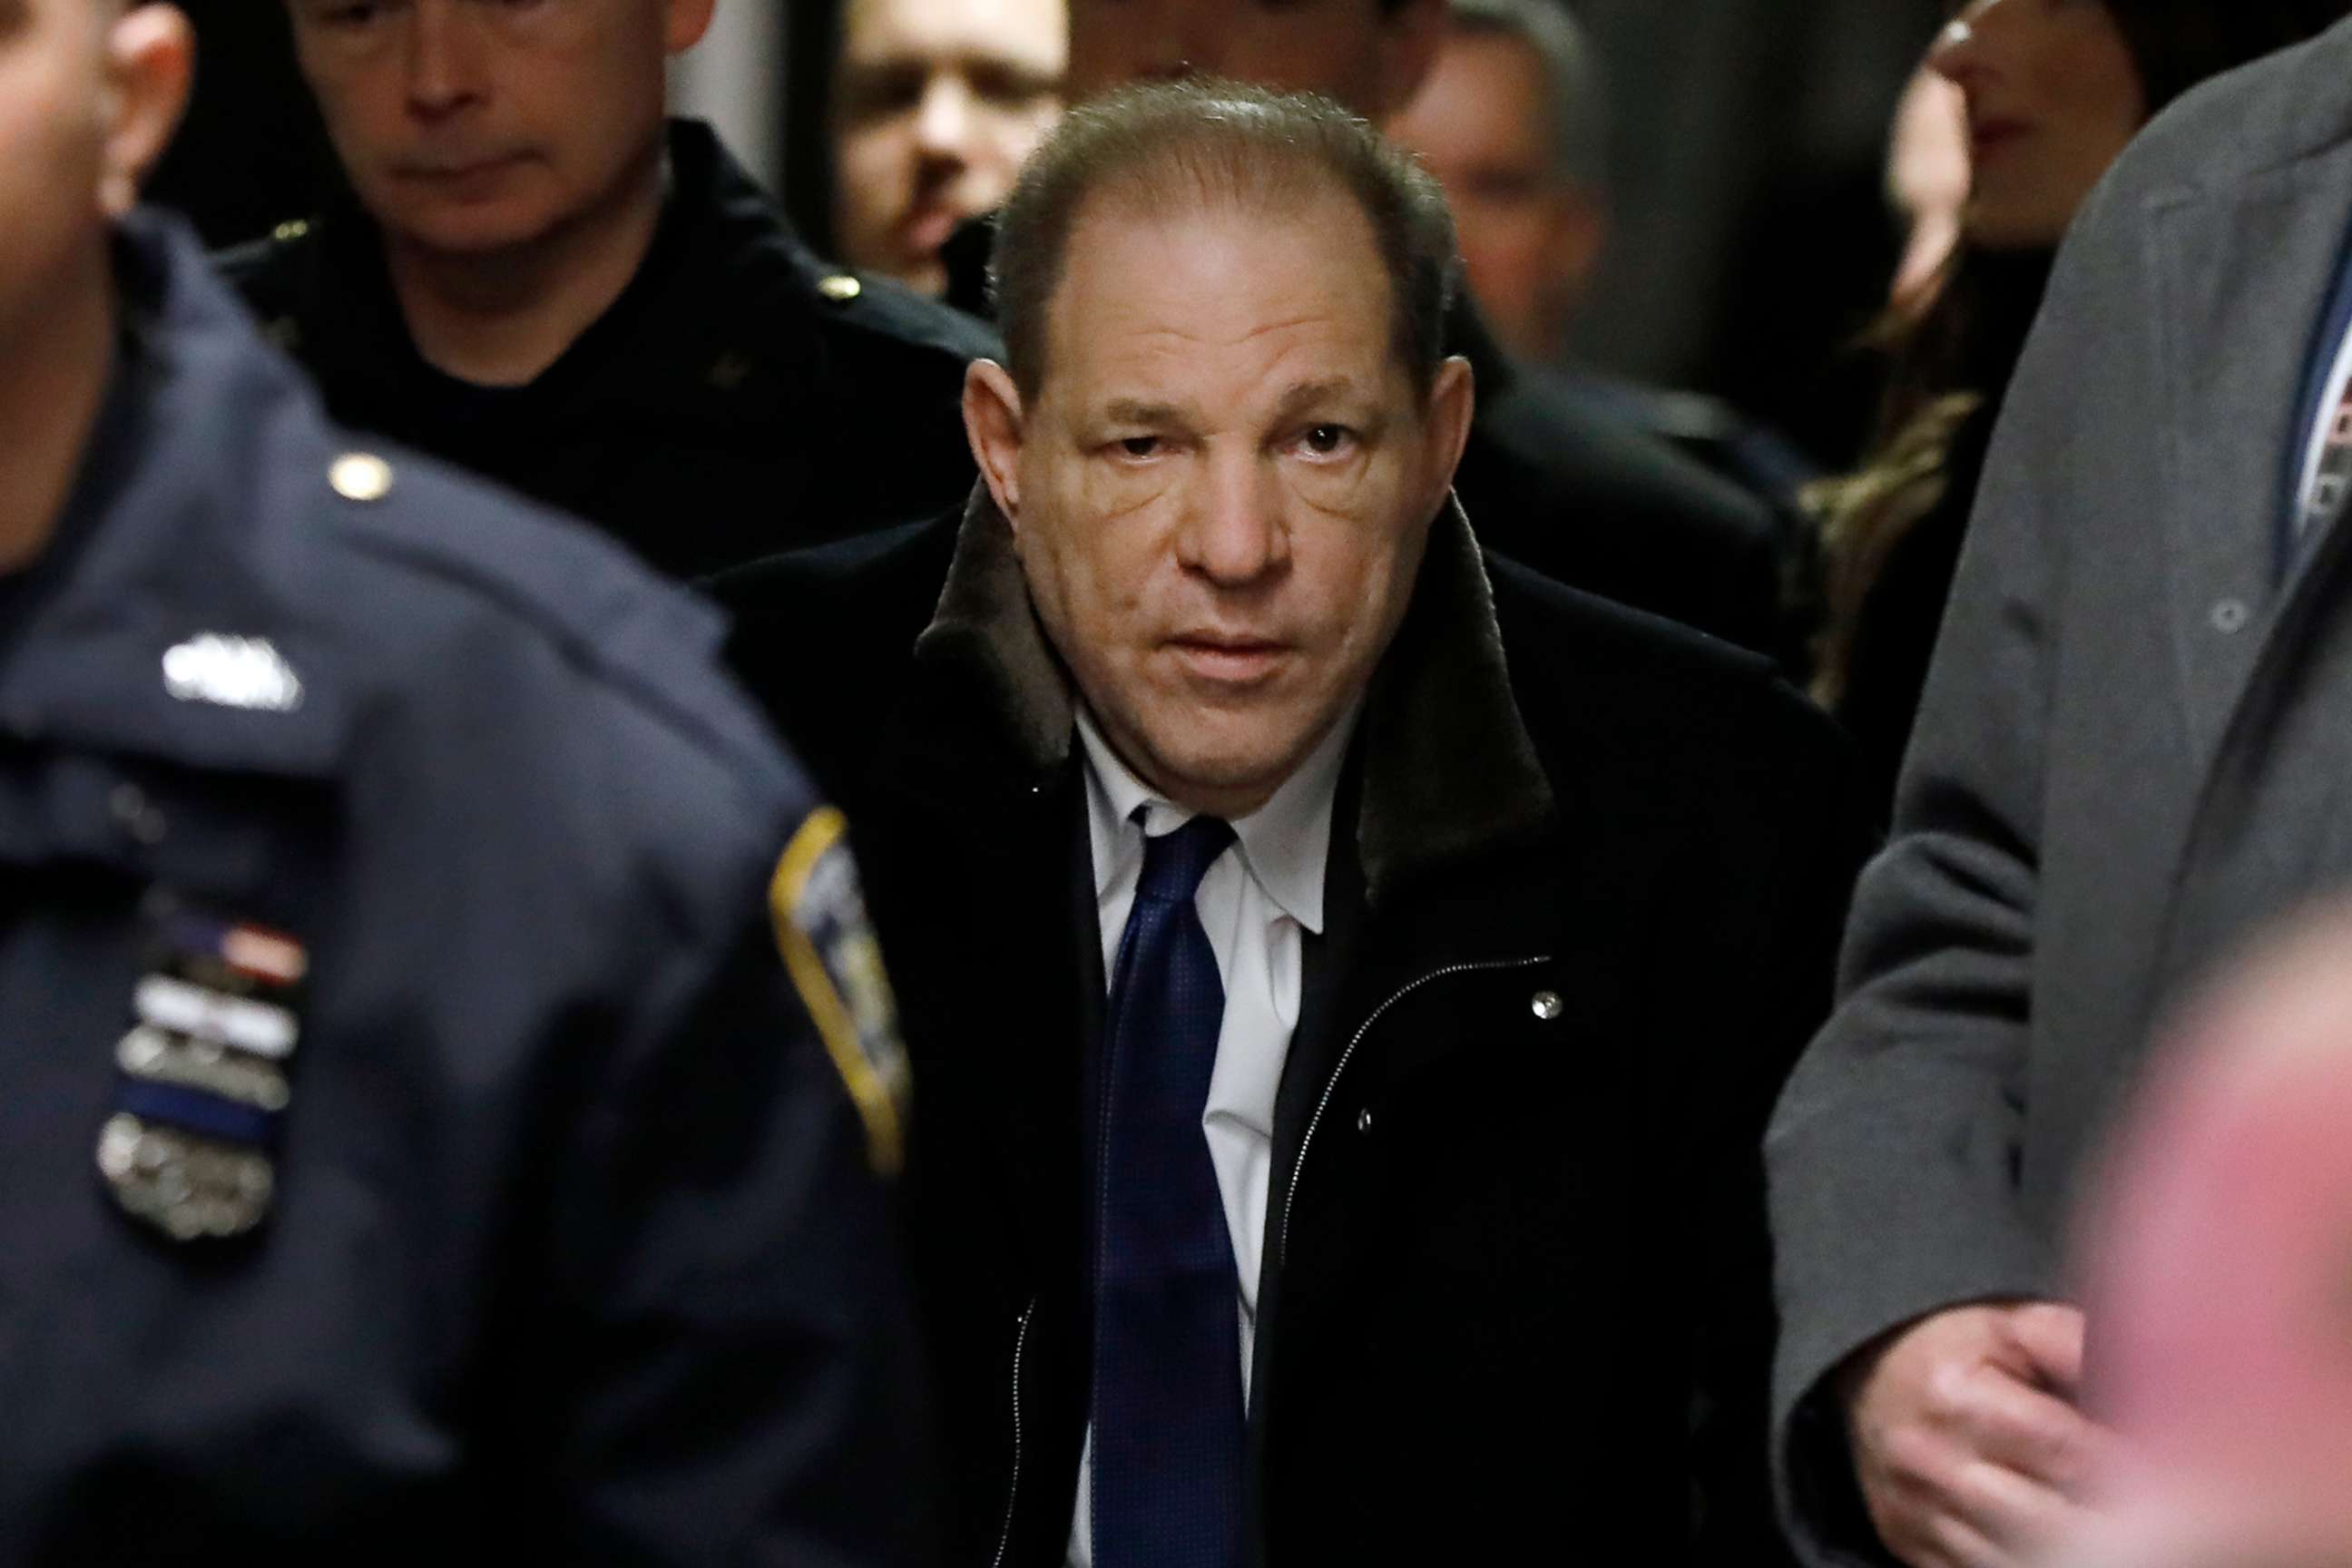 PHOTO: Harvey Weinstein leaves court during his rape trial, Jan. 21, 2020, in New York.